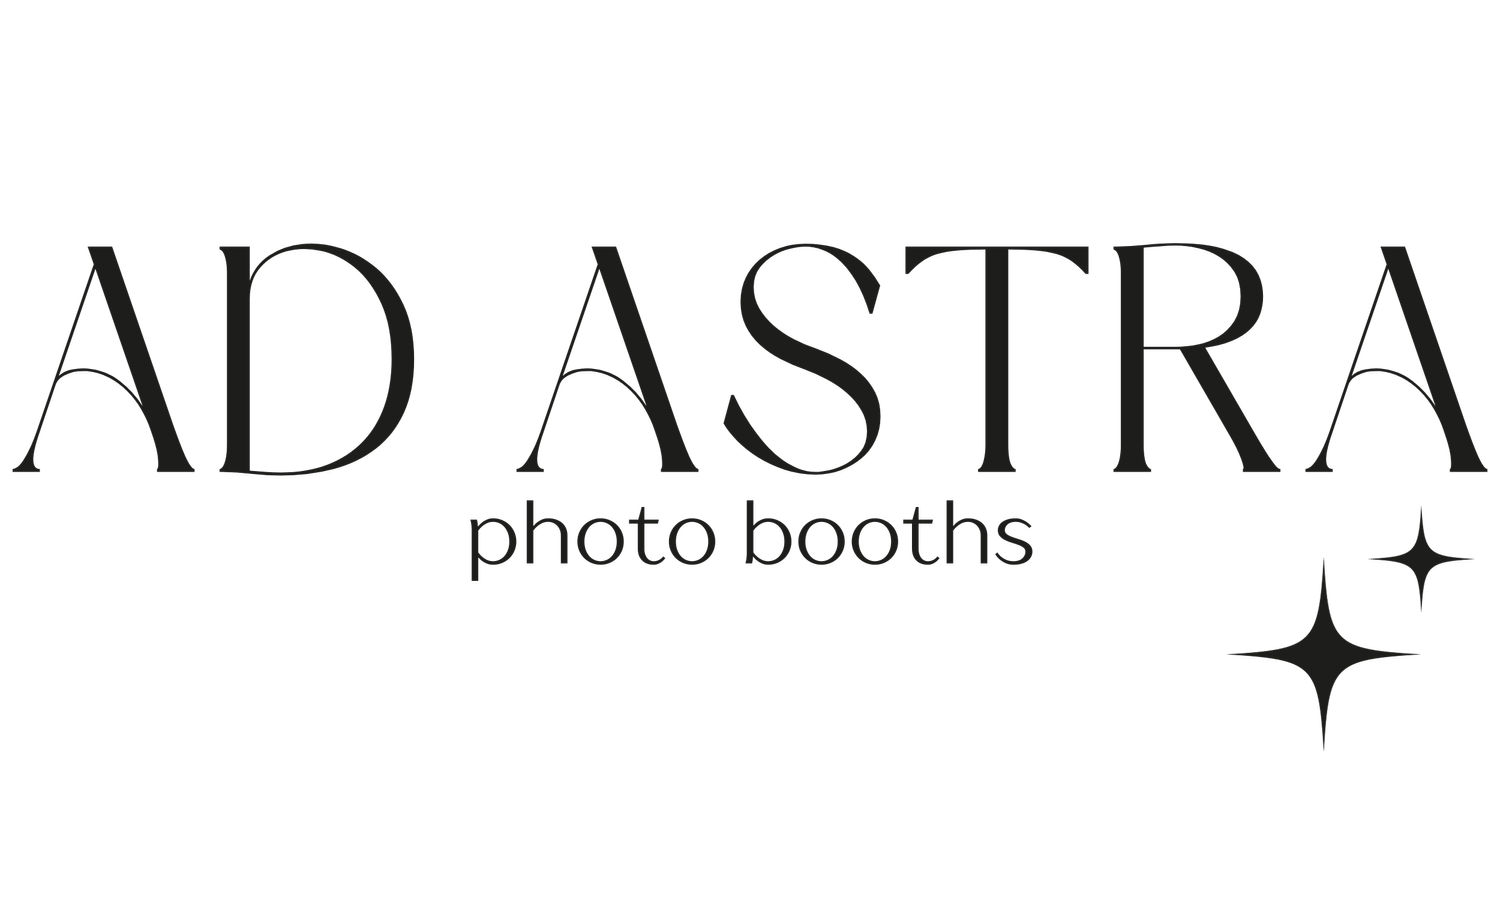 Ad Astra Photo Booths